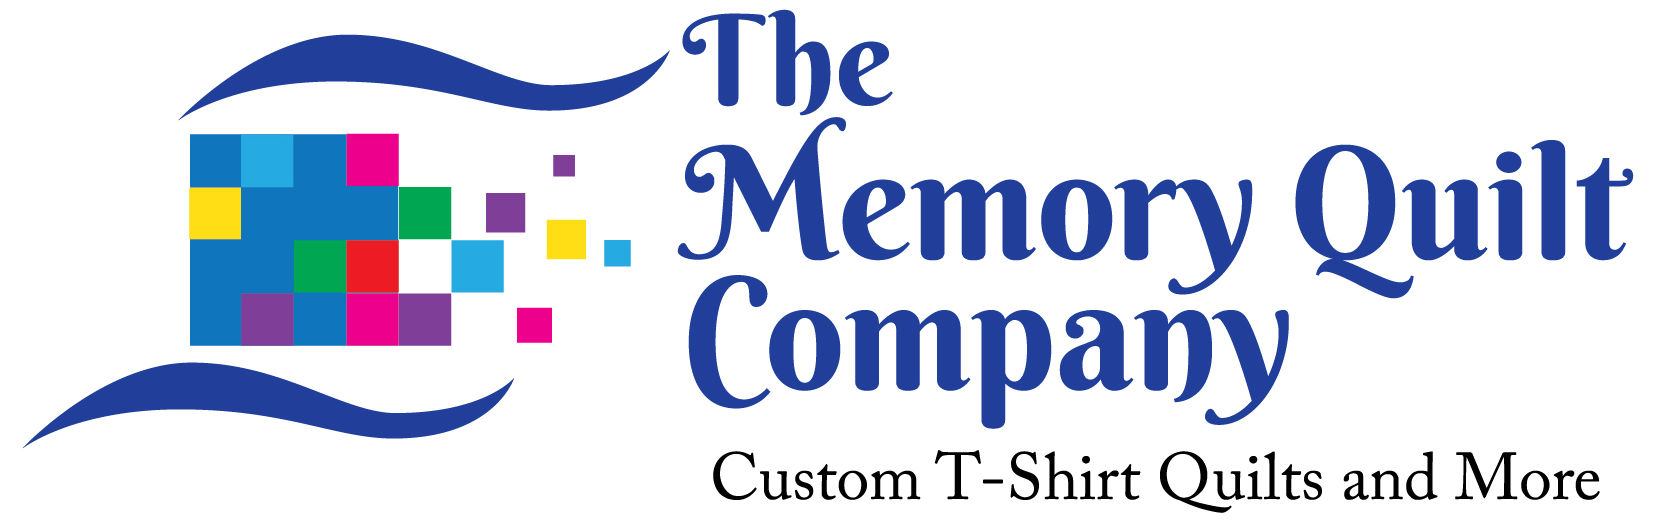 The Memory Quilt Company